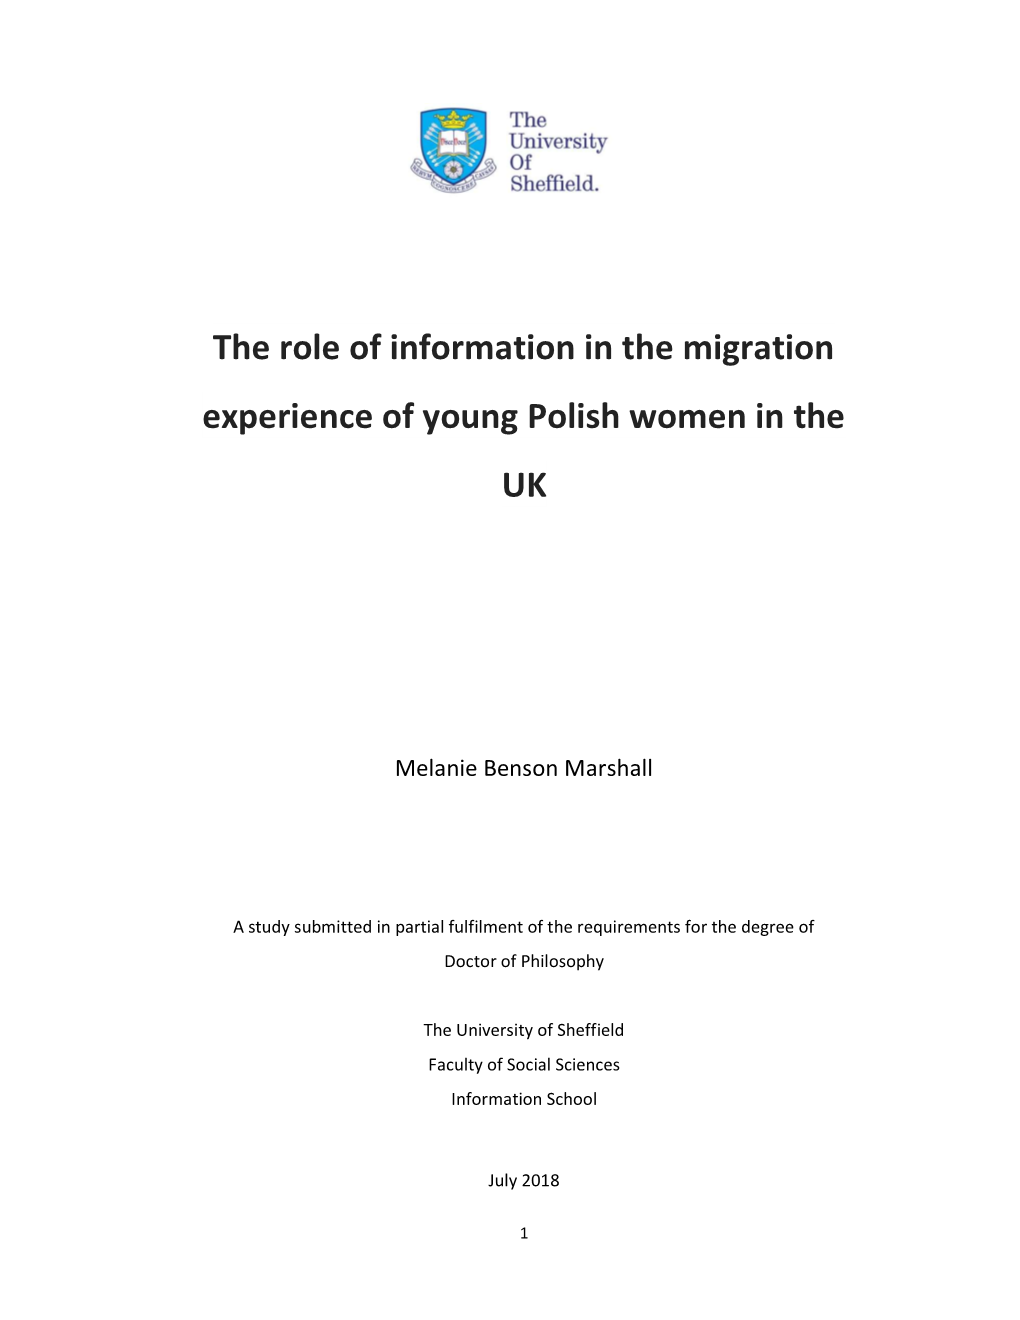 The Role of Information in the Migration Experience of Young Polish Women in the UK